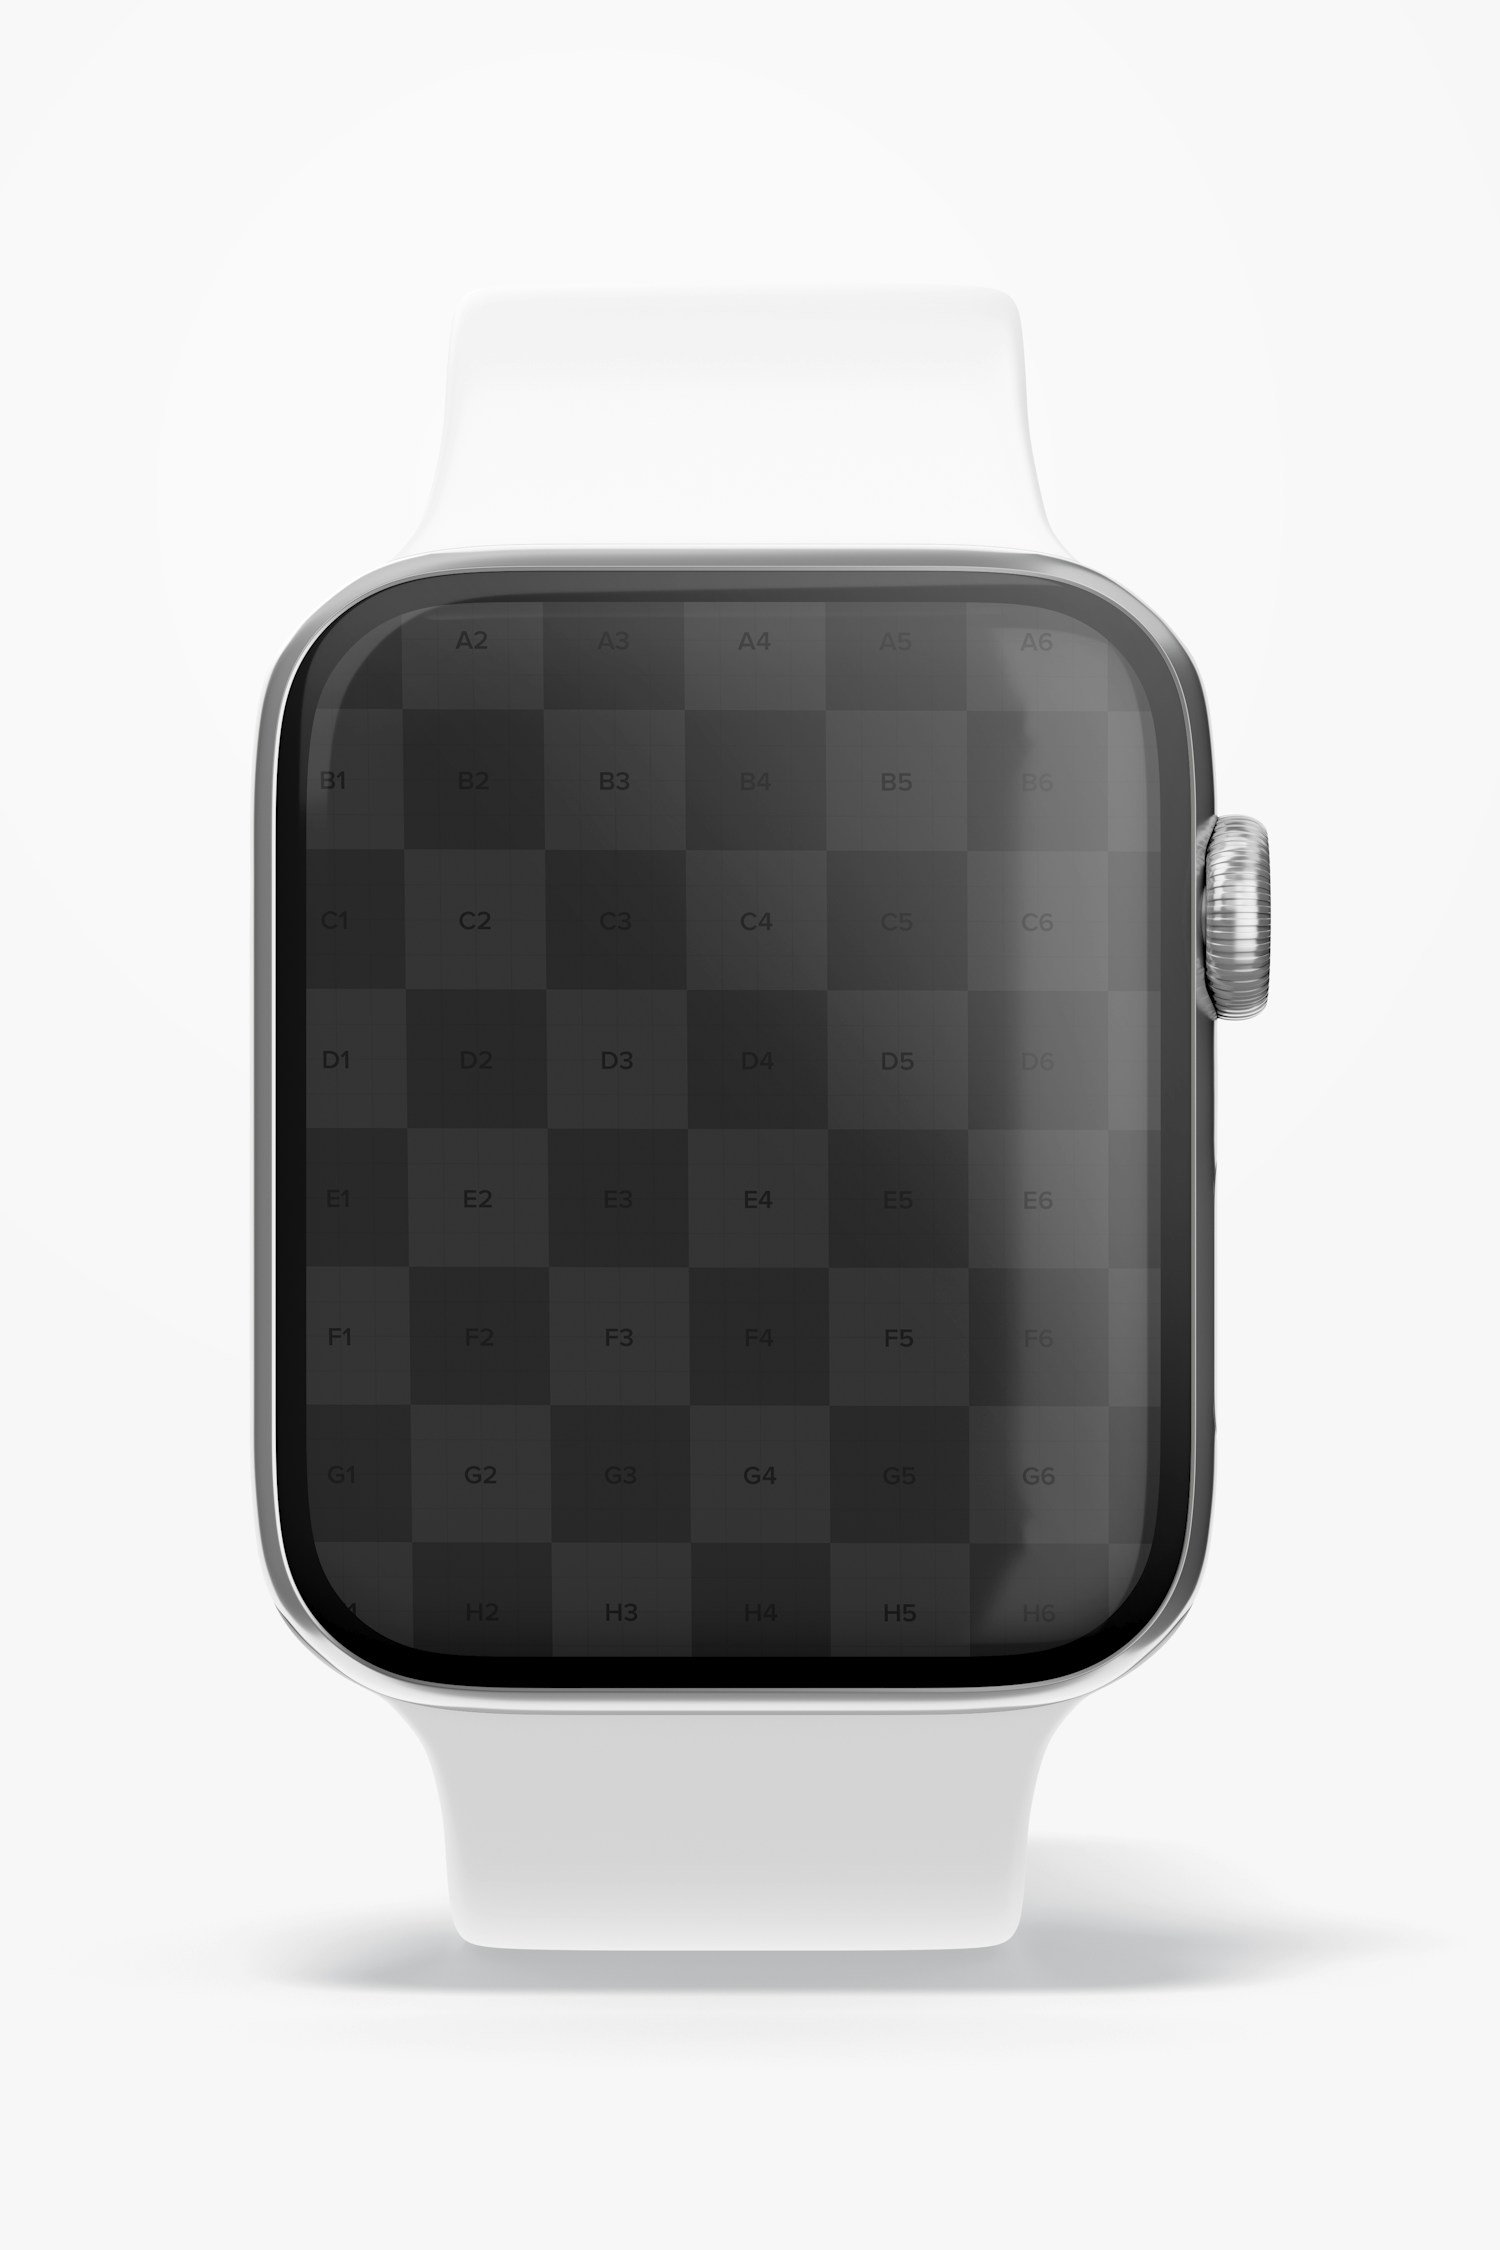 Apple Watch Series 6 Mockup, Front View